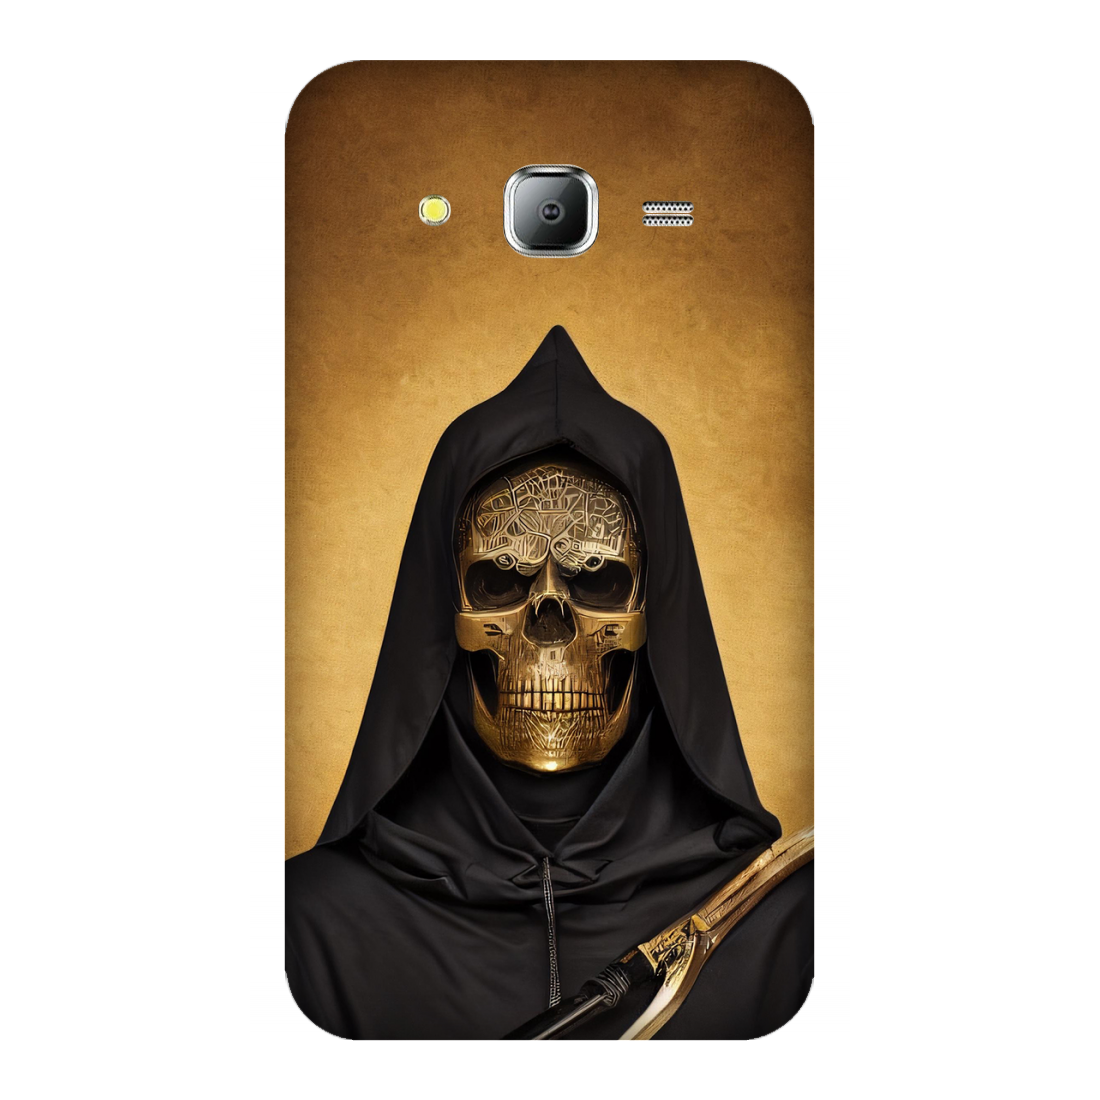 Mysterious Figure with a Ceremonial Sword Case Samsung Galaxy J7(2015)